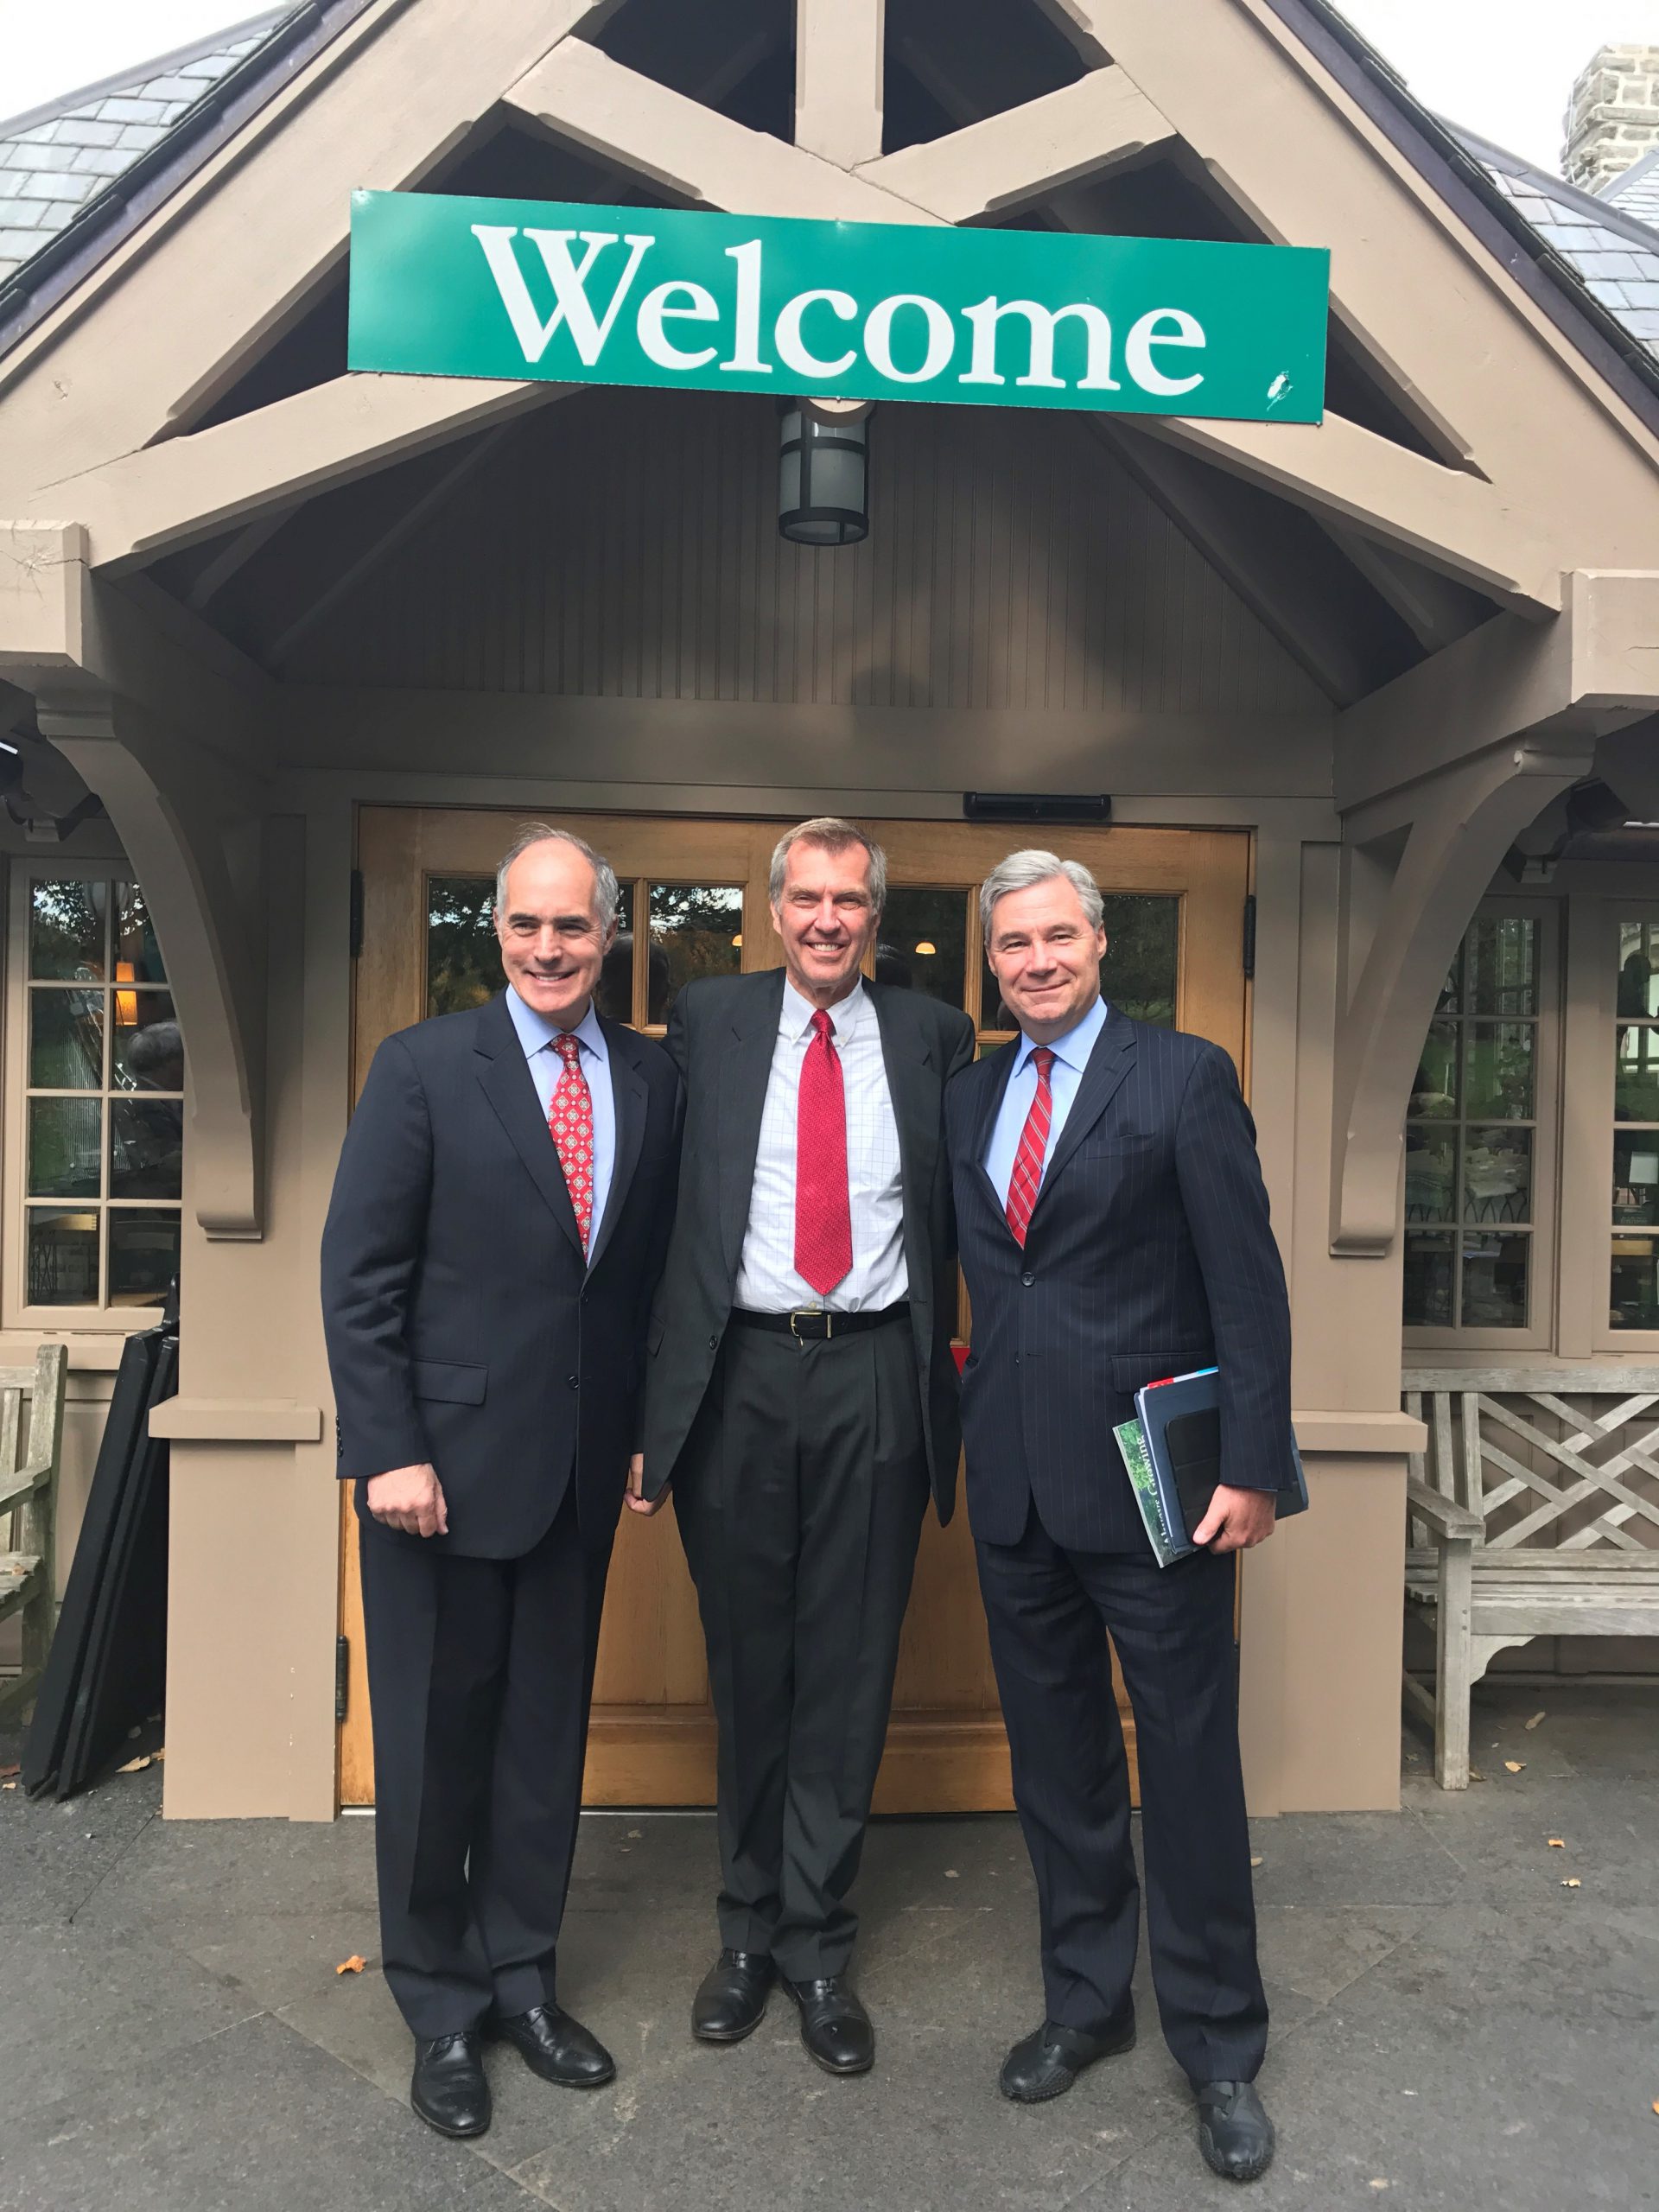 A panel discussion on Climate Change and its Effects on Children was held at Morris Arboretum of the University of Pennsylvania on Monday, October 24th, 2016. Shown in front of Morris Arboretum's Visitor Center are (left to right) US Senator Bob Casey, The F.Otto Haas Executive Director of Morris Arboretum of the University of Pennsylvania Paul Meyer, and Senator Sheldon Whitehouse.